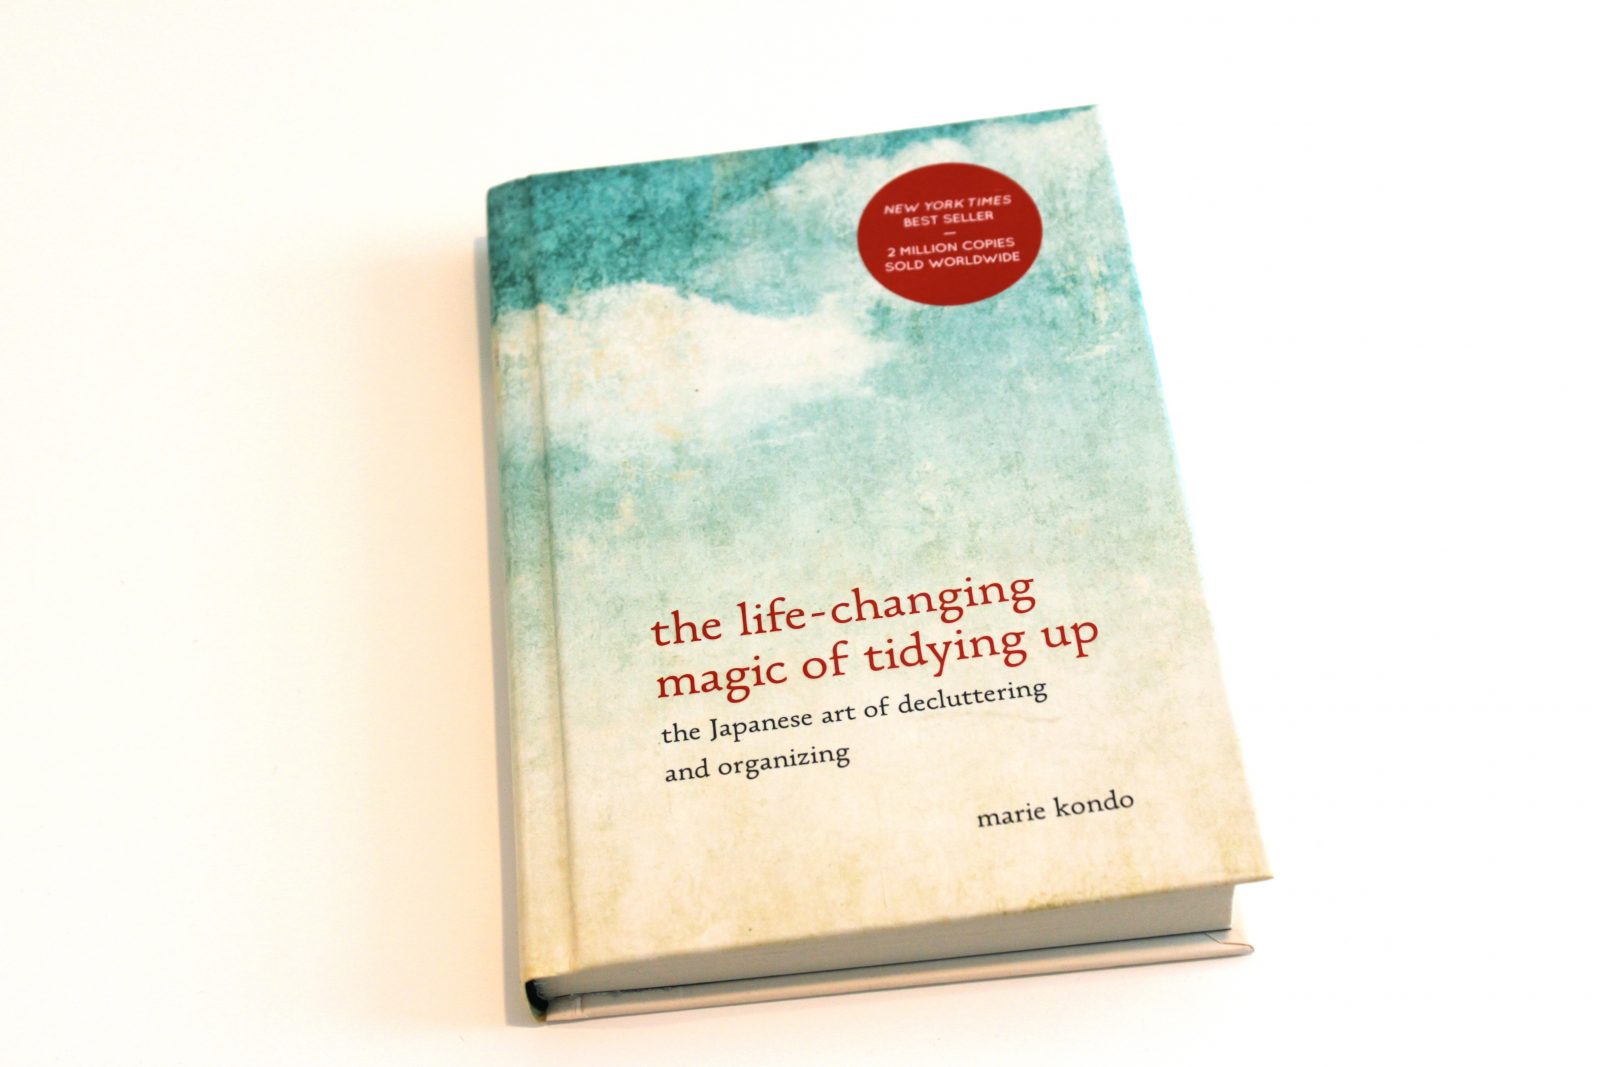 The Life changing Magic of Tidying up by Marie Kondo. Marie Kondō – the Life-changing Magic of Tidying up. Tidying up. The Day that changing Magic back Cover.